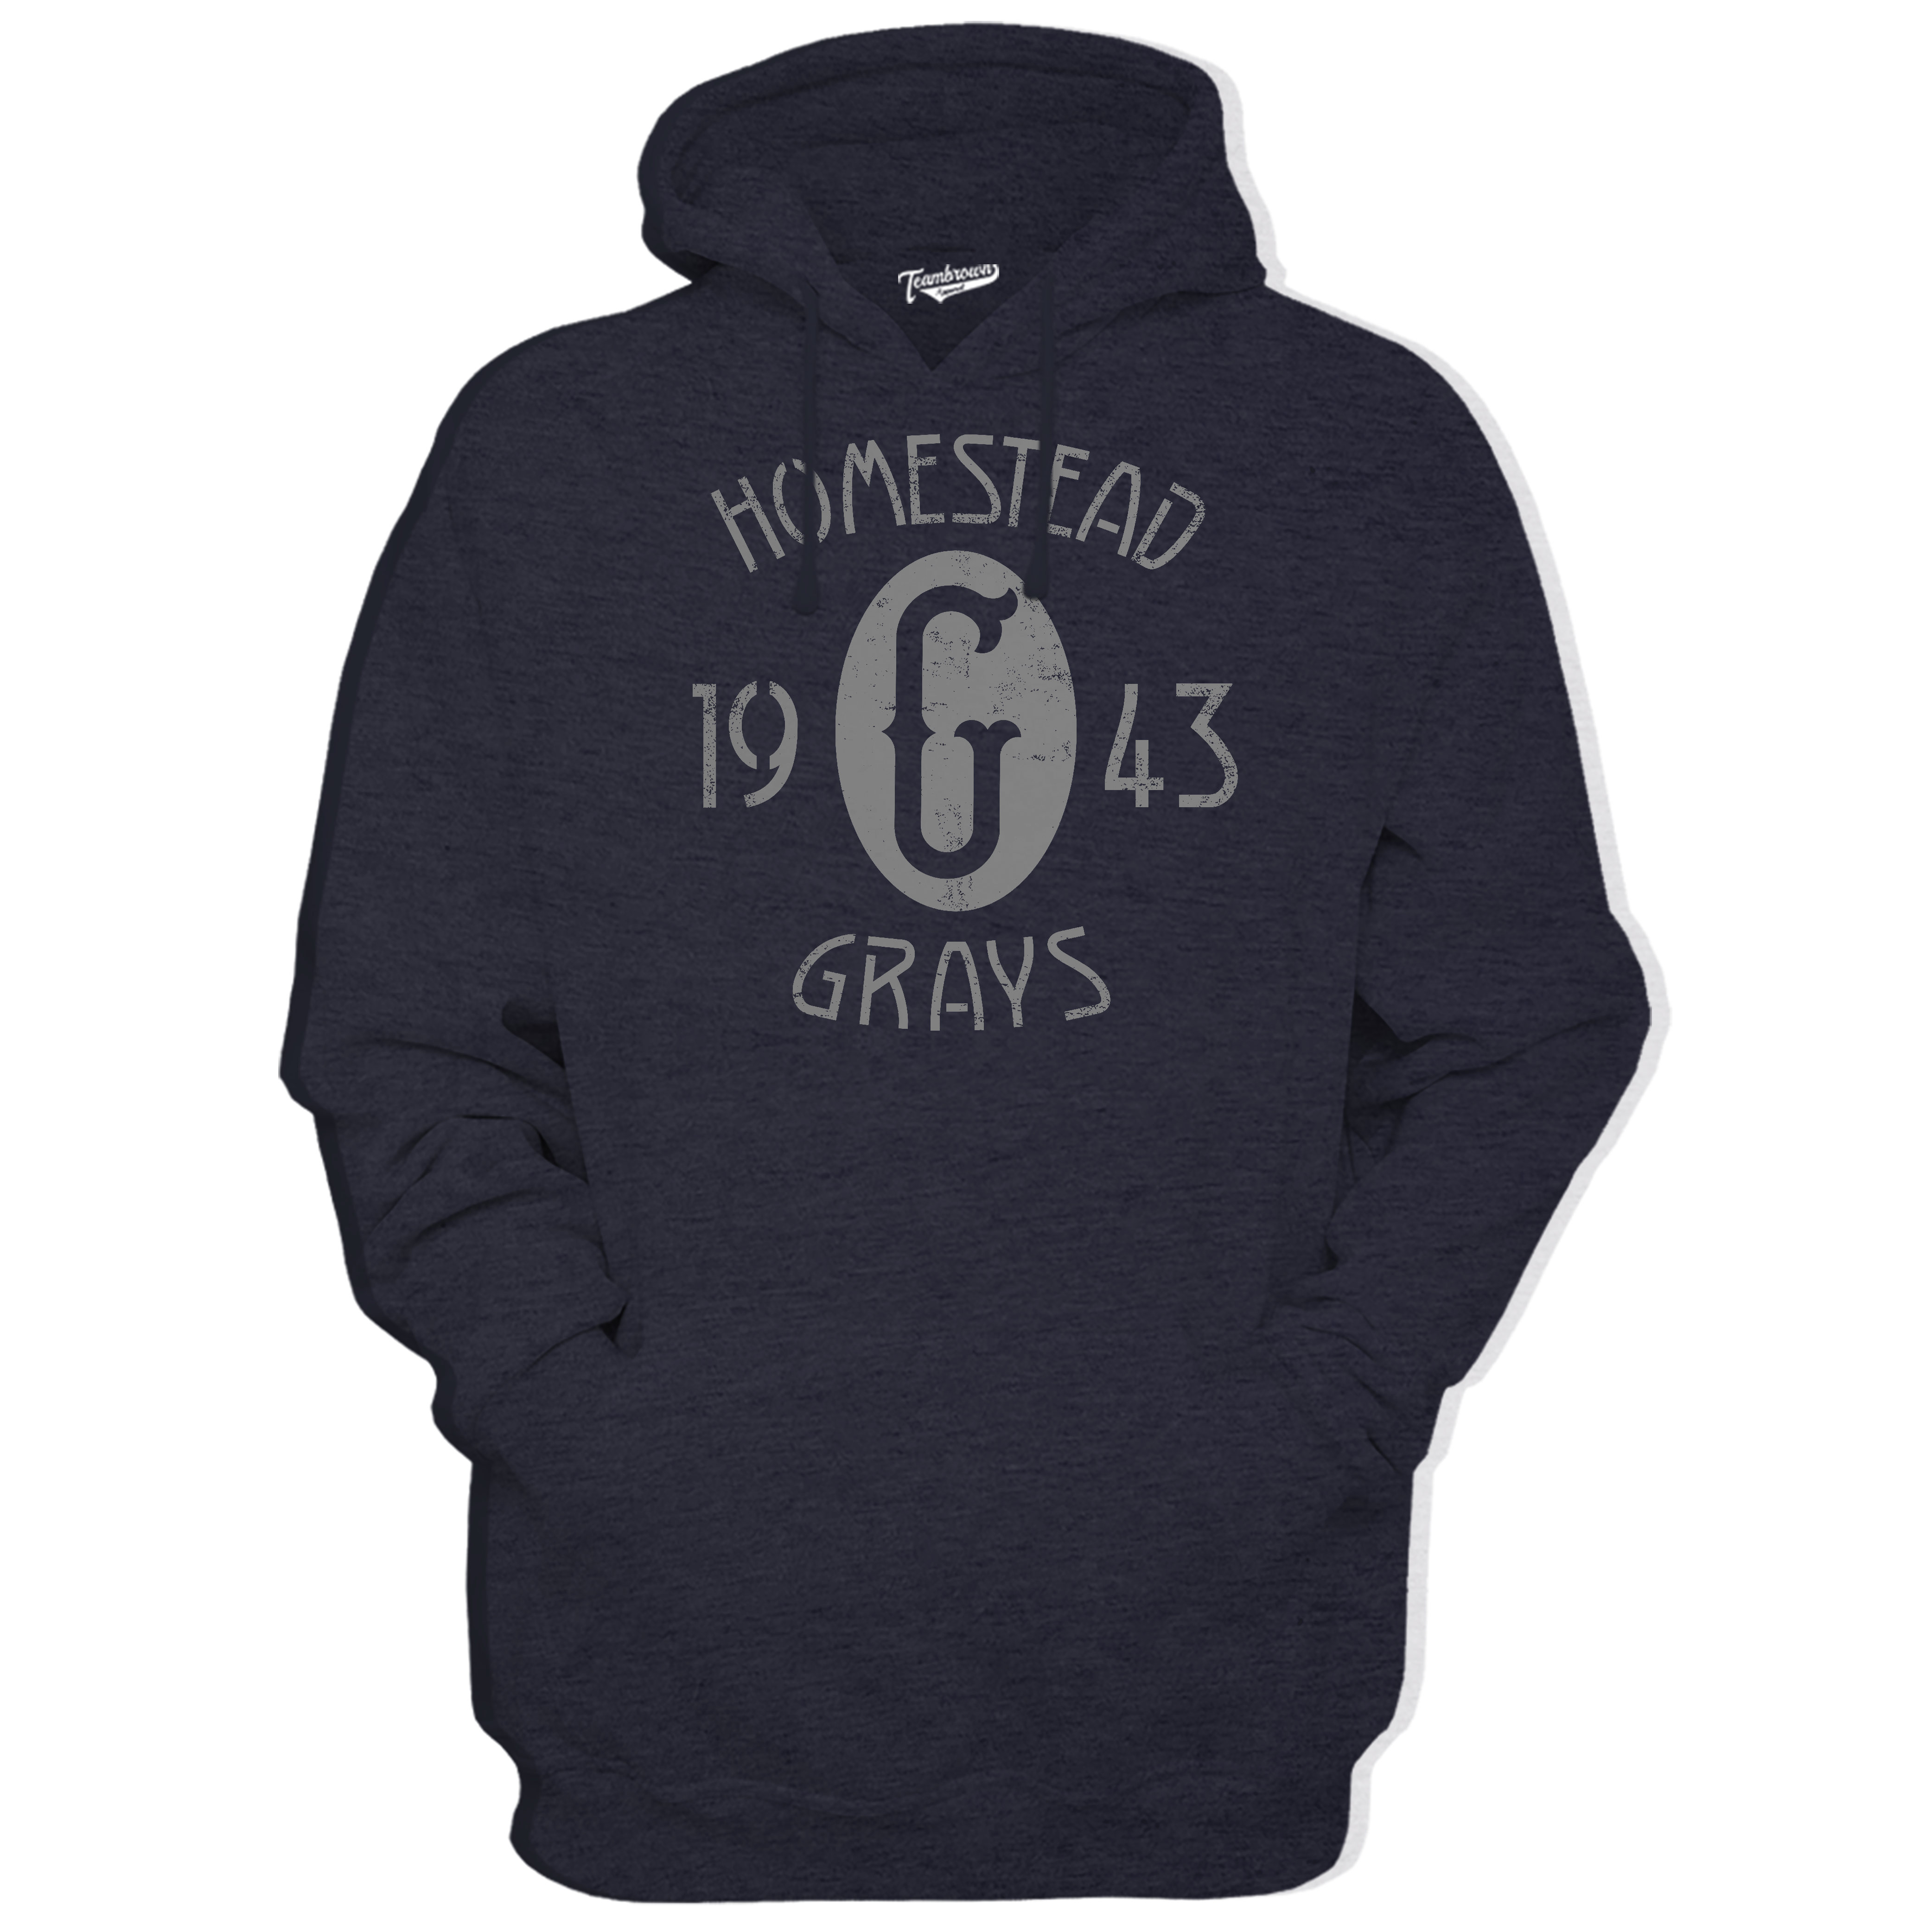 1943 Champions - Homestead Grays - Griffith Park - Unisex Premium Hoodie | Officially Licensed - NLBM